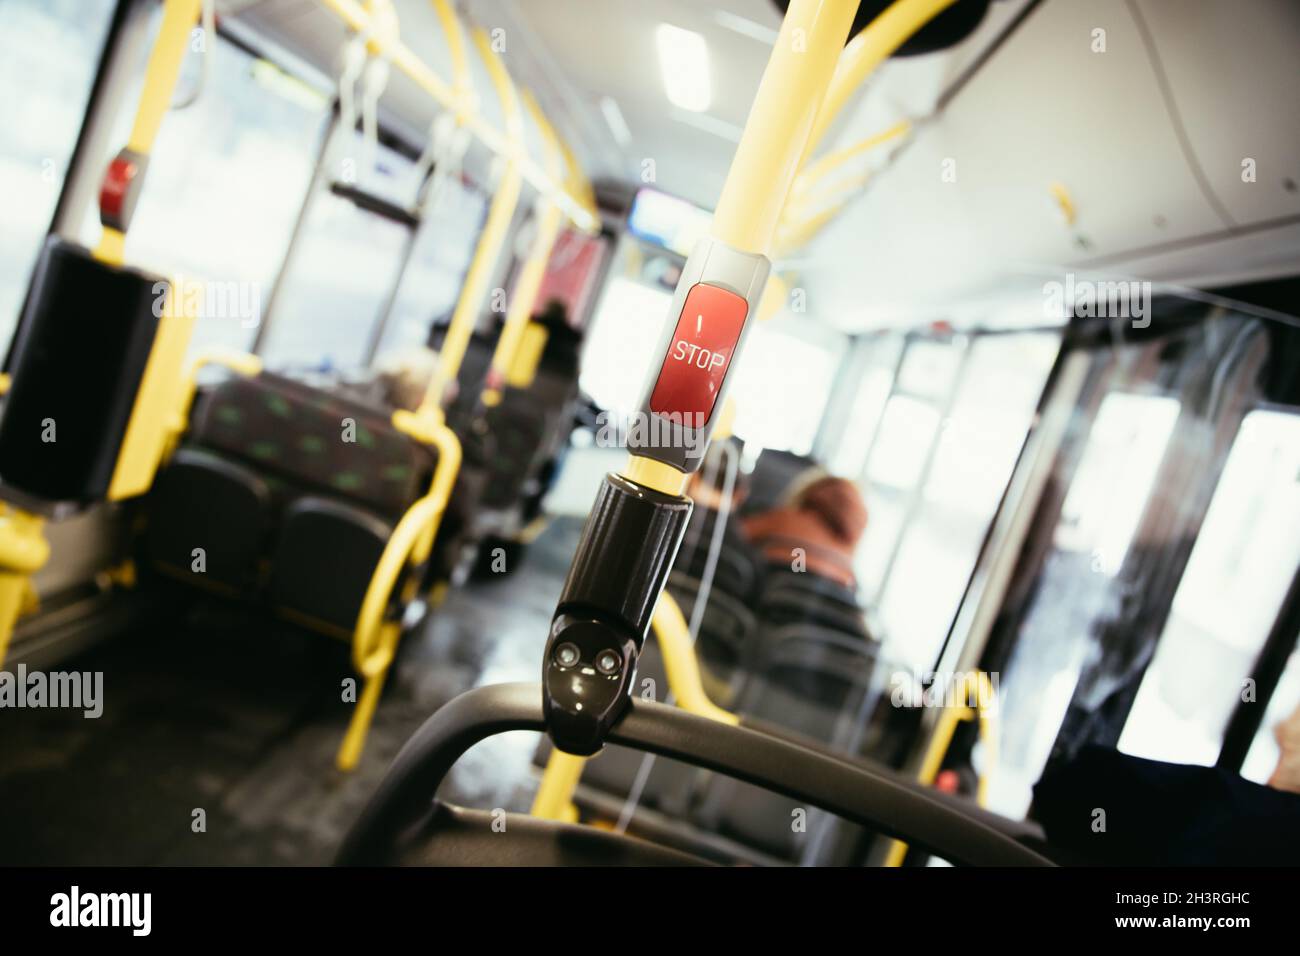 Red stop button in a bus, commuting, public transport Stock Photo